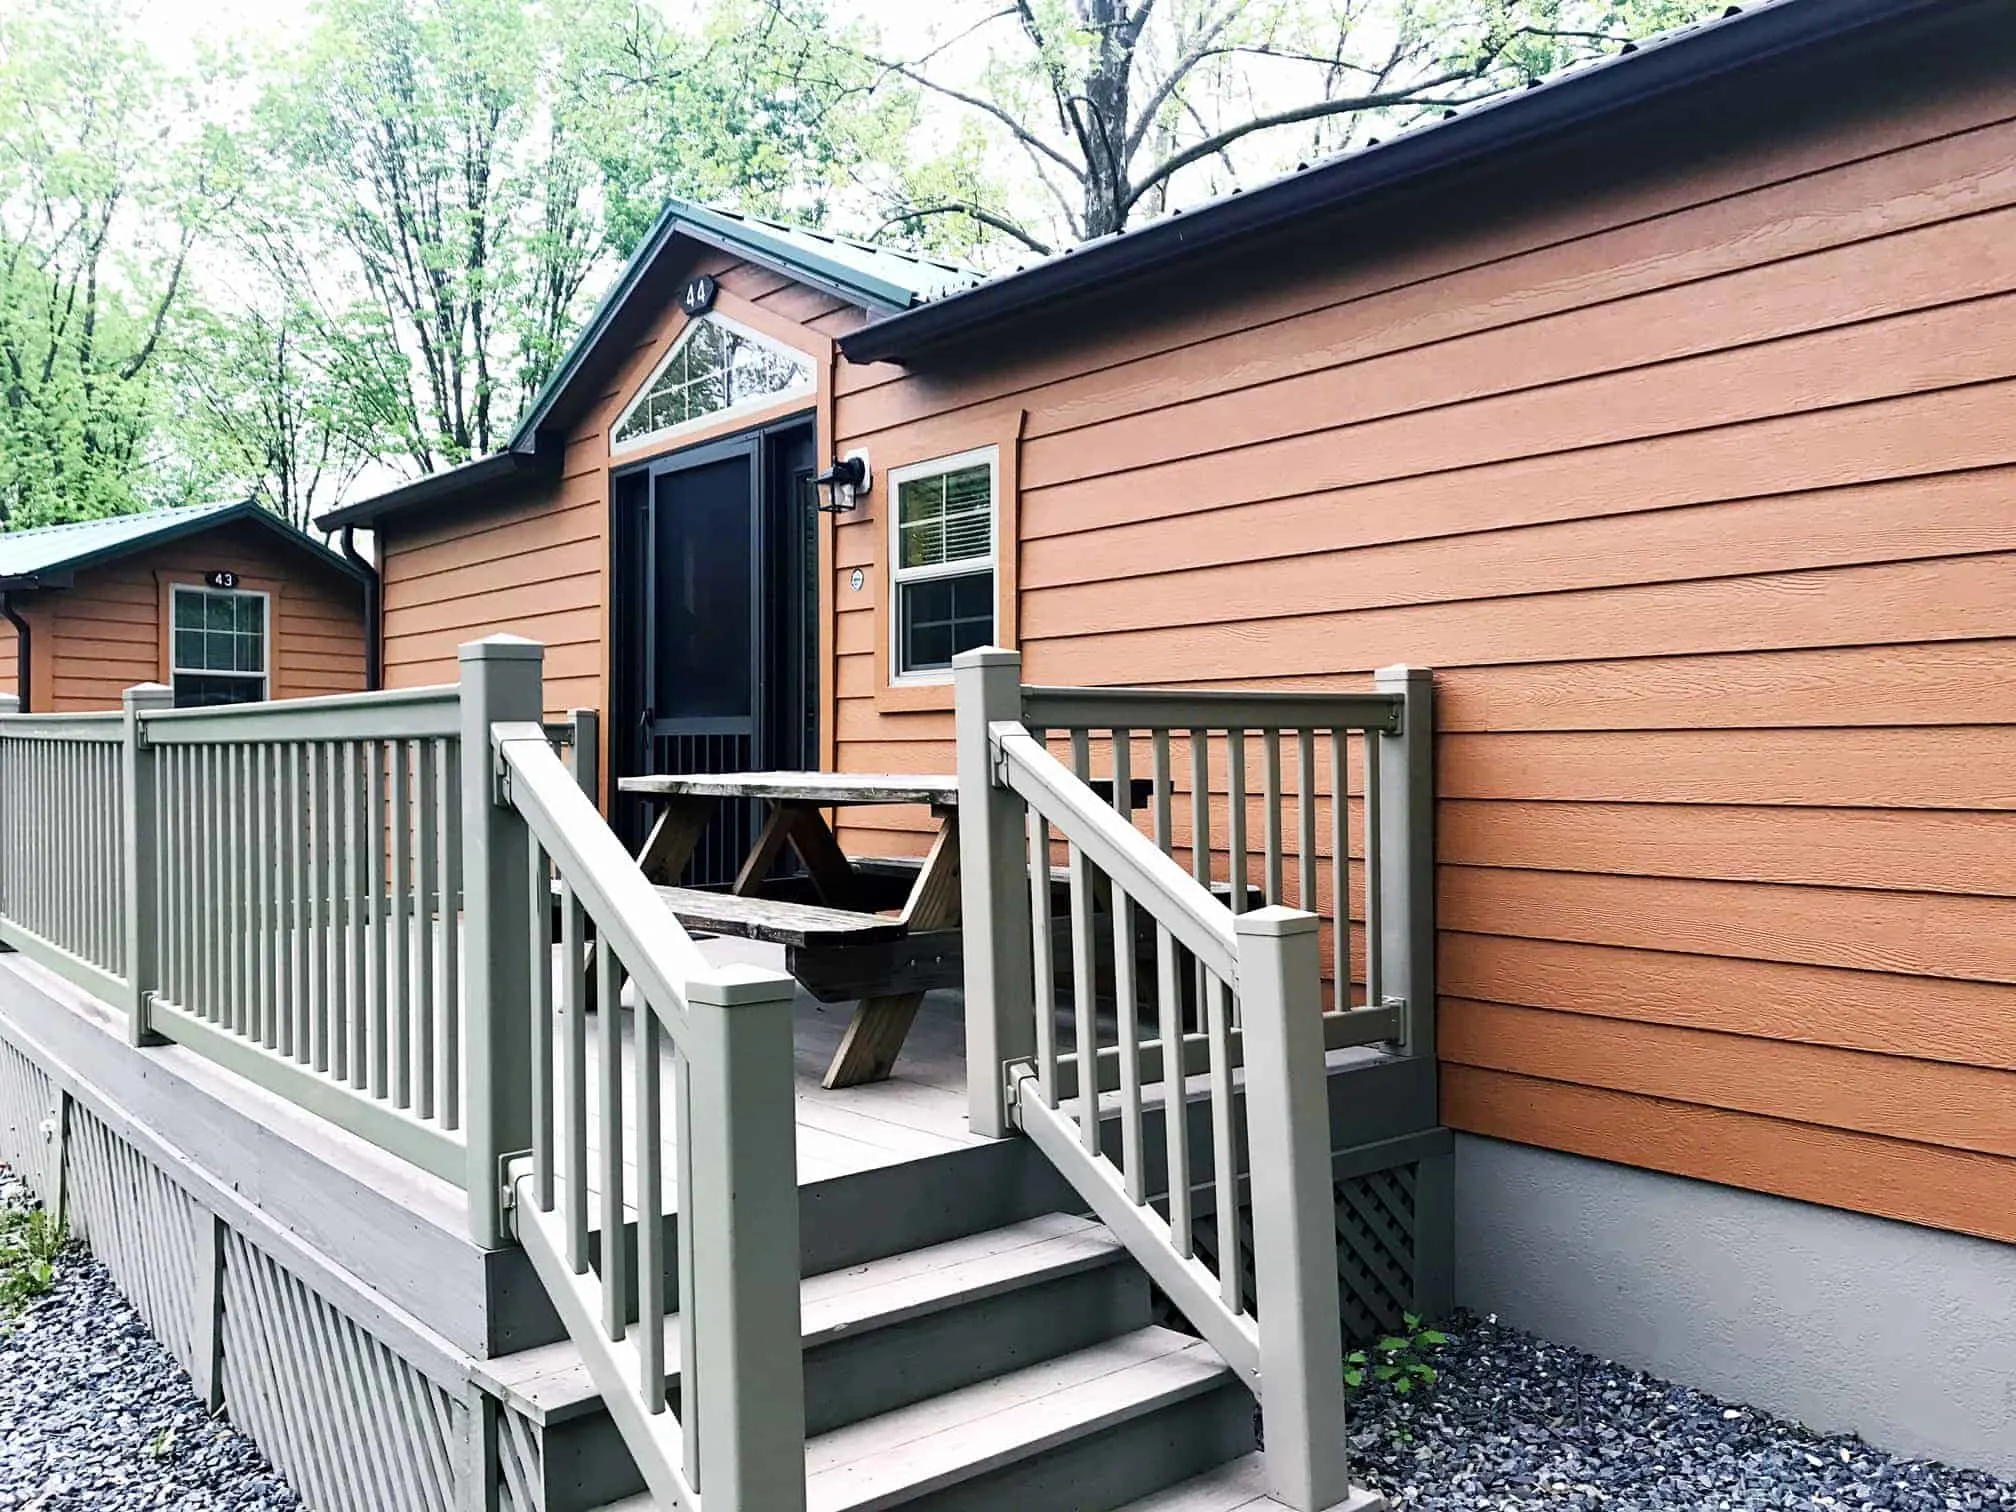 2-bedroom deluxe cabin is perfect for big families on a budget at Hersheypark camping resort.